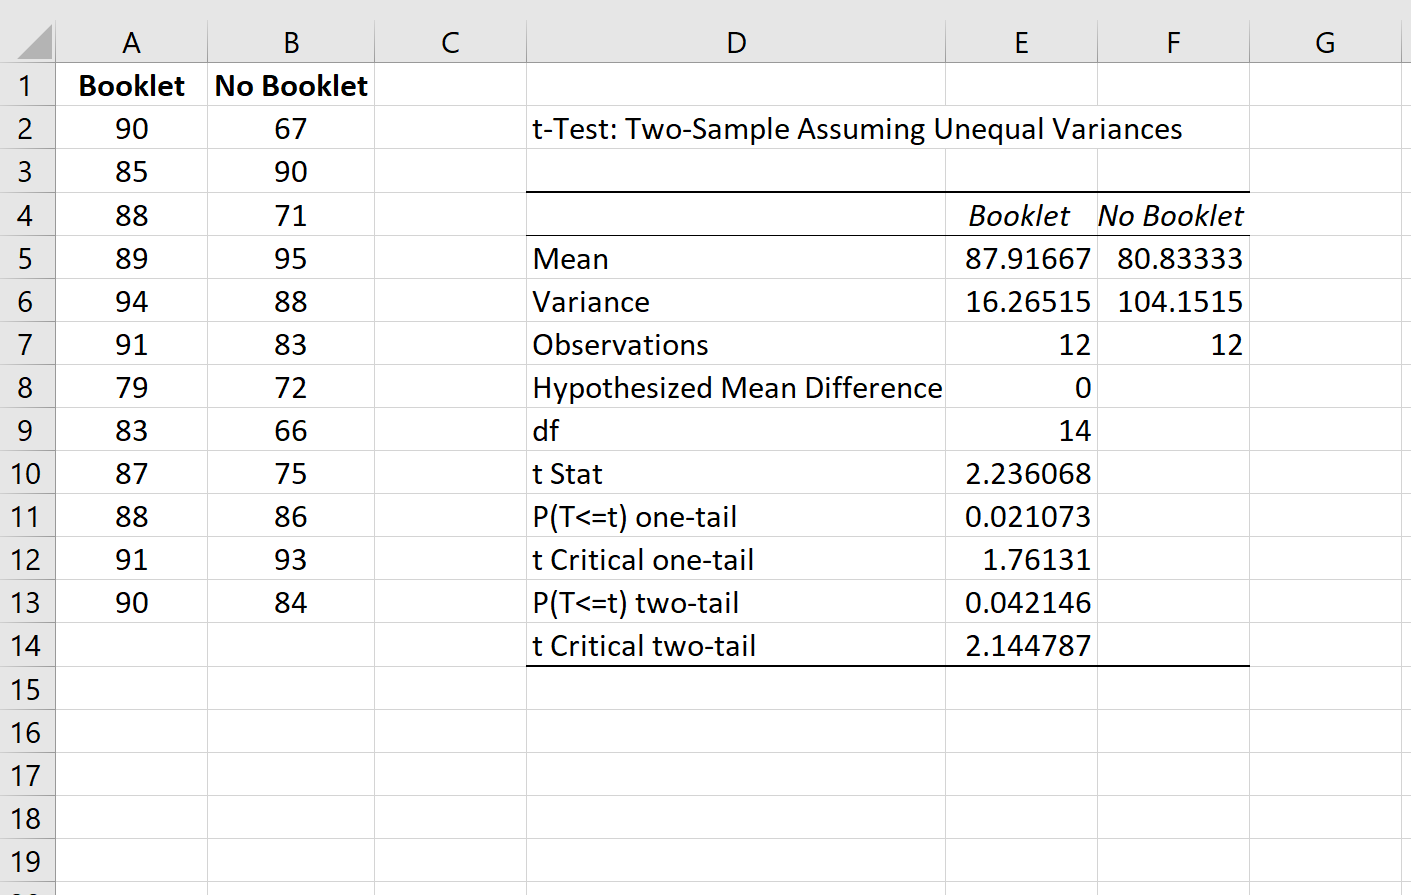 Welch's t-test output in Excel